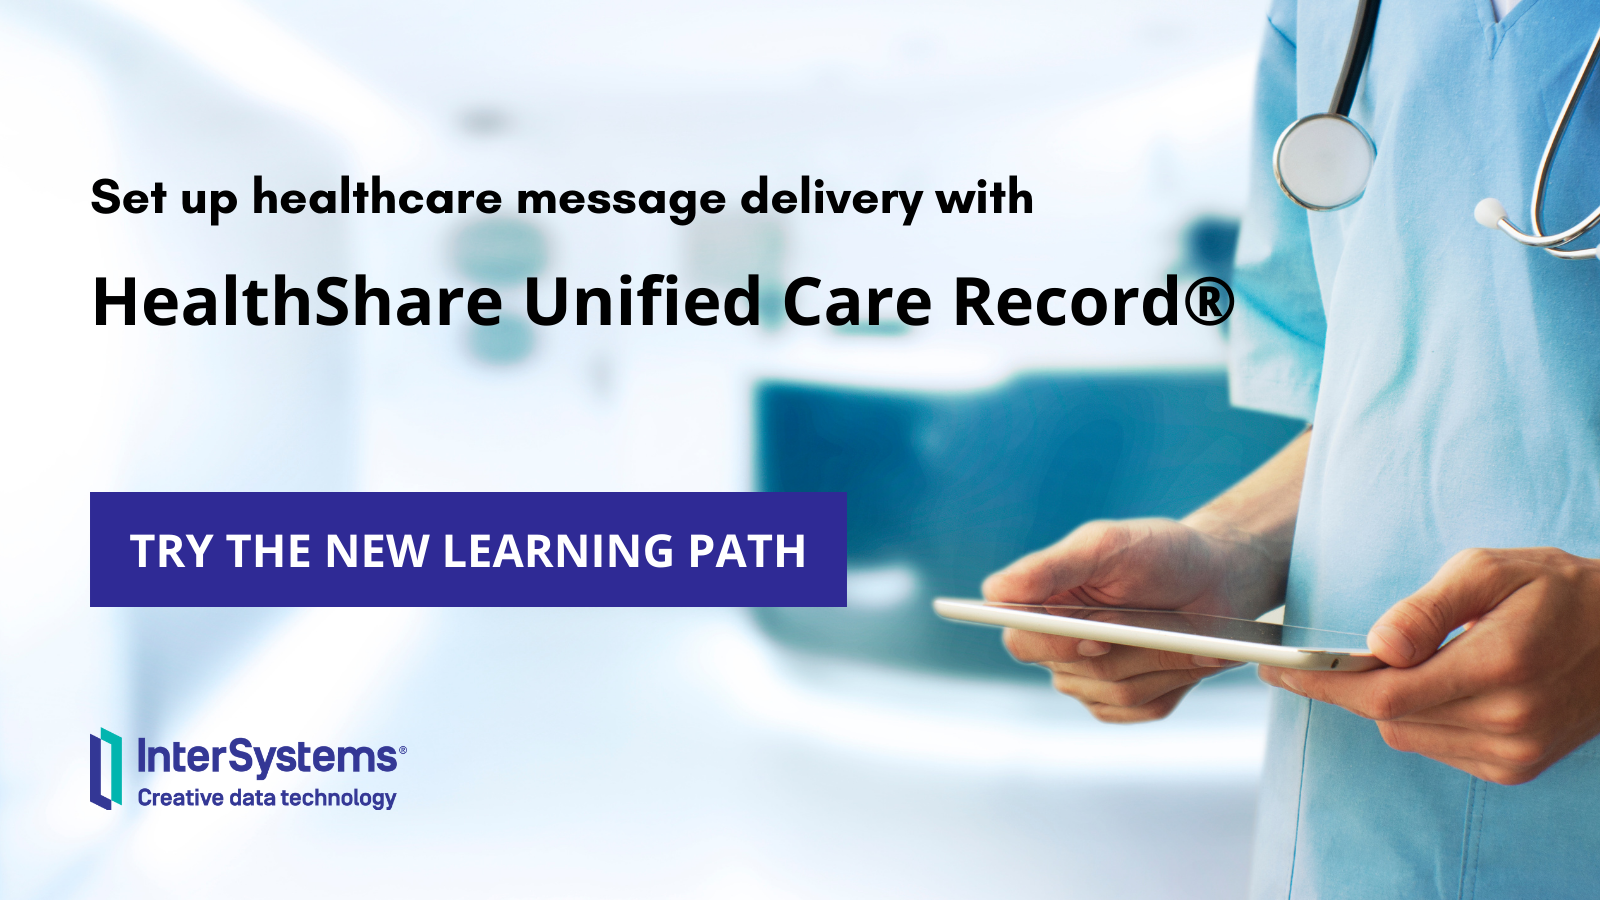 Set up healthcare message delivery with HealthShare Unified Care Record: Try the new learning path.